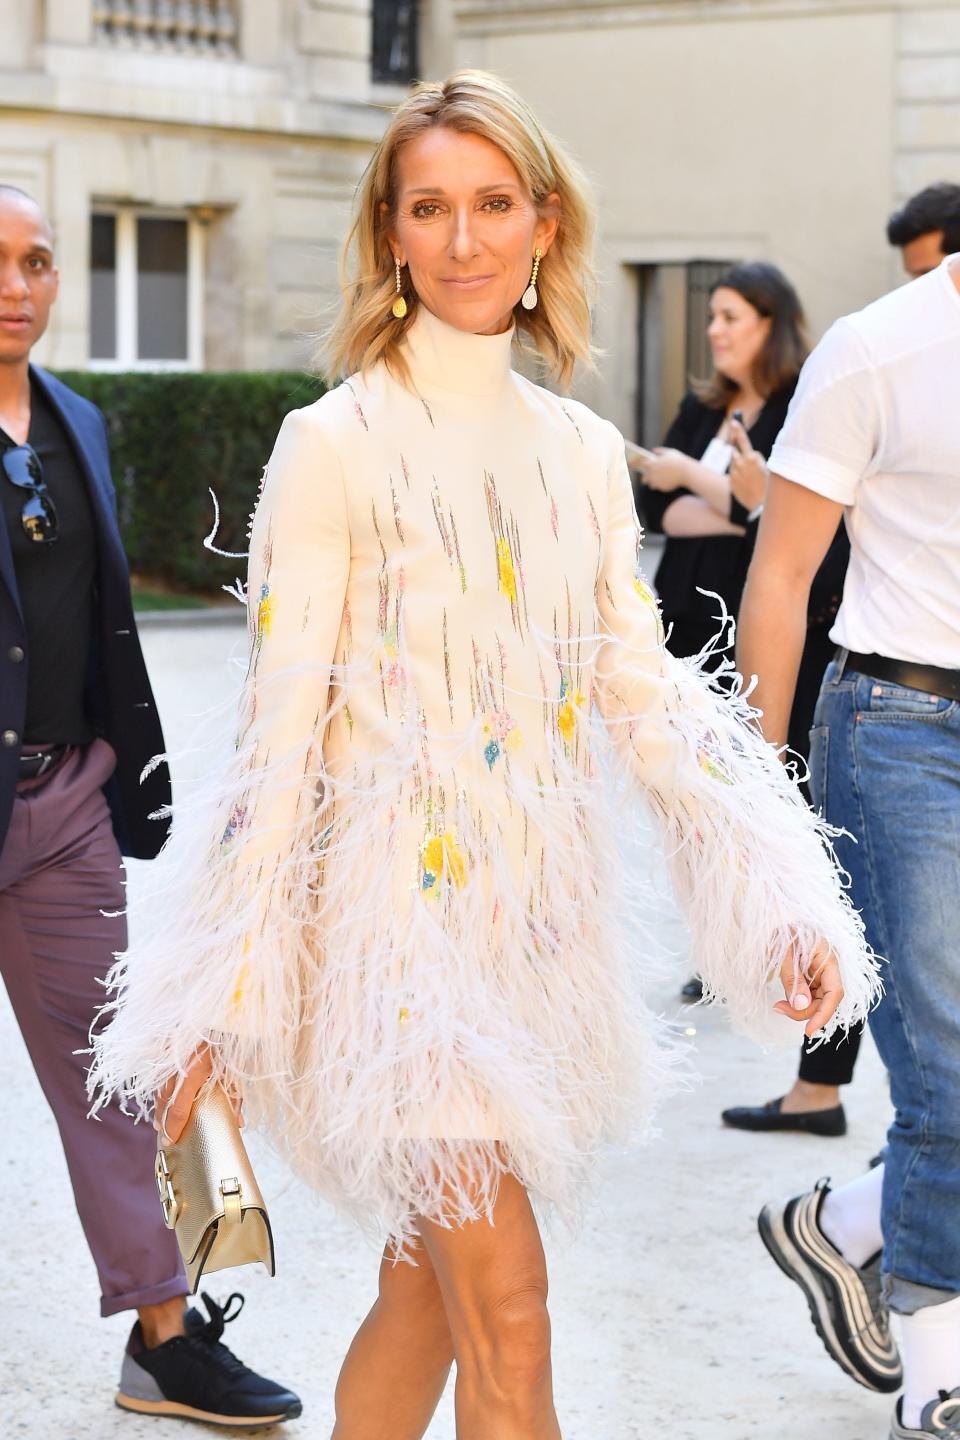 Celine in a turtleneck long-sleeve minidress. The cream dress has feathers and colorful embelishments.